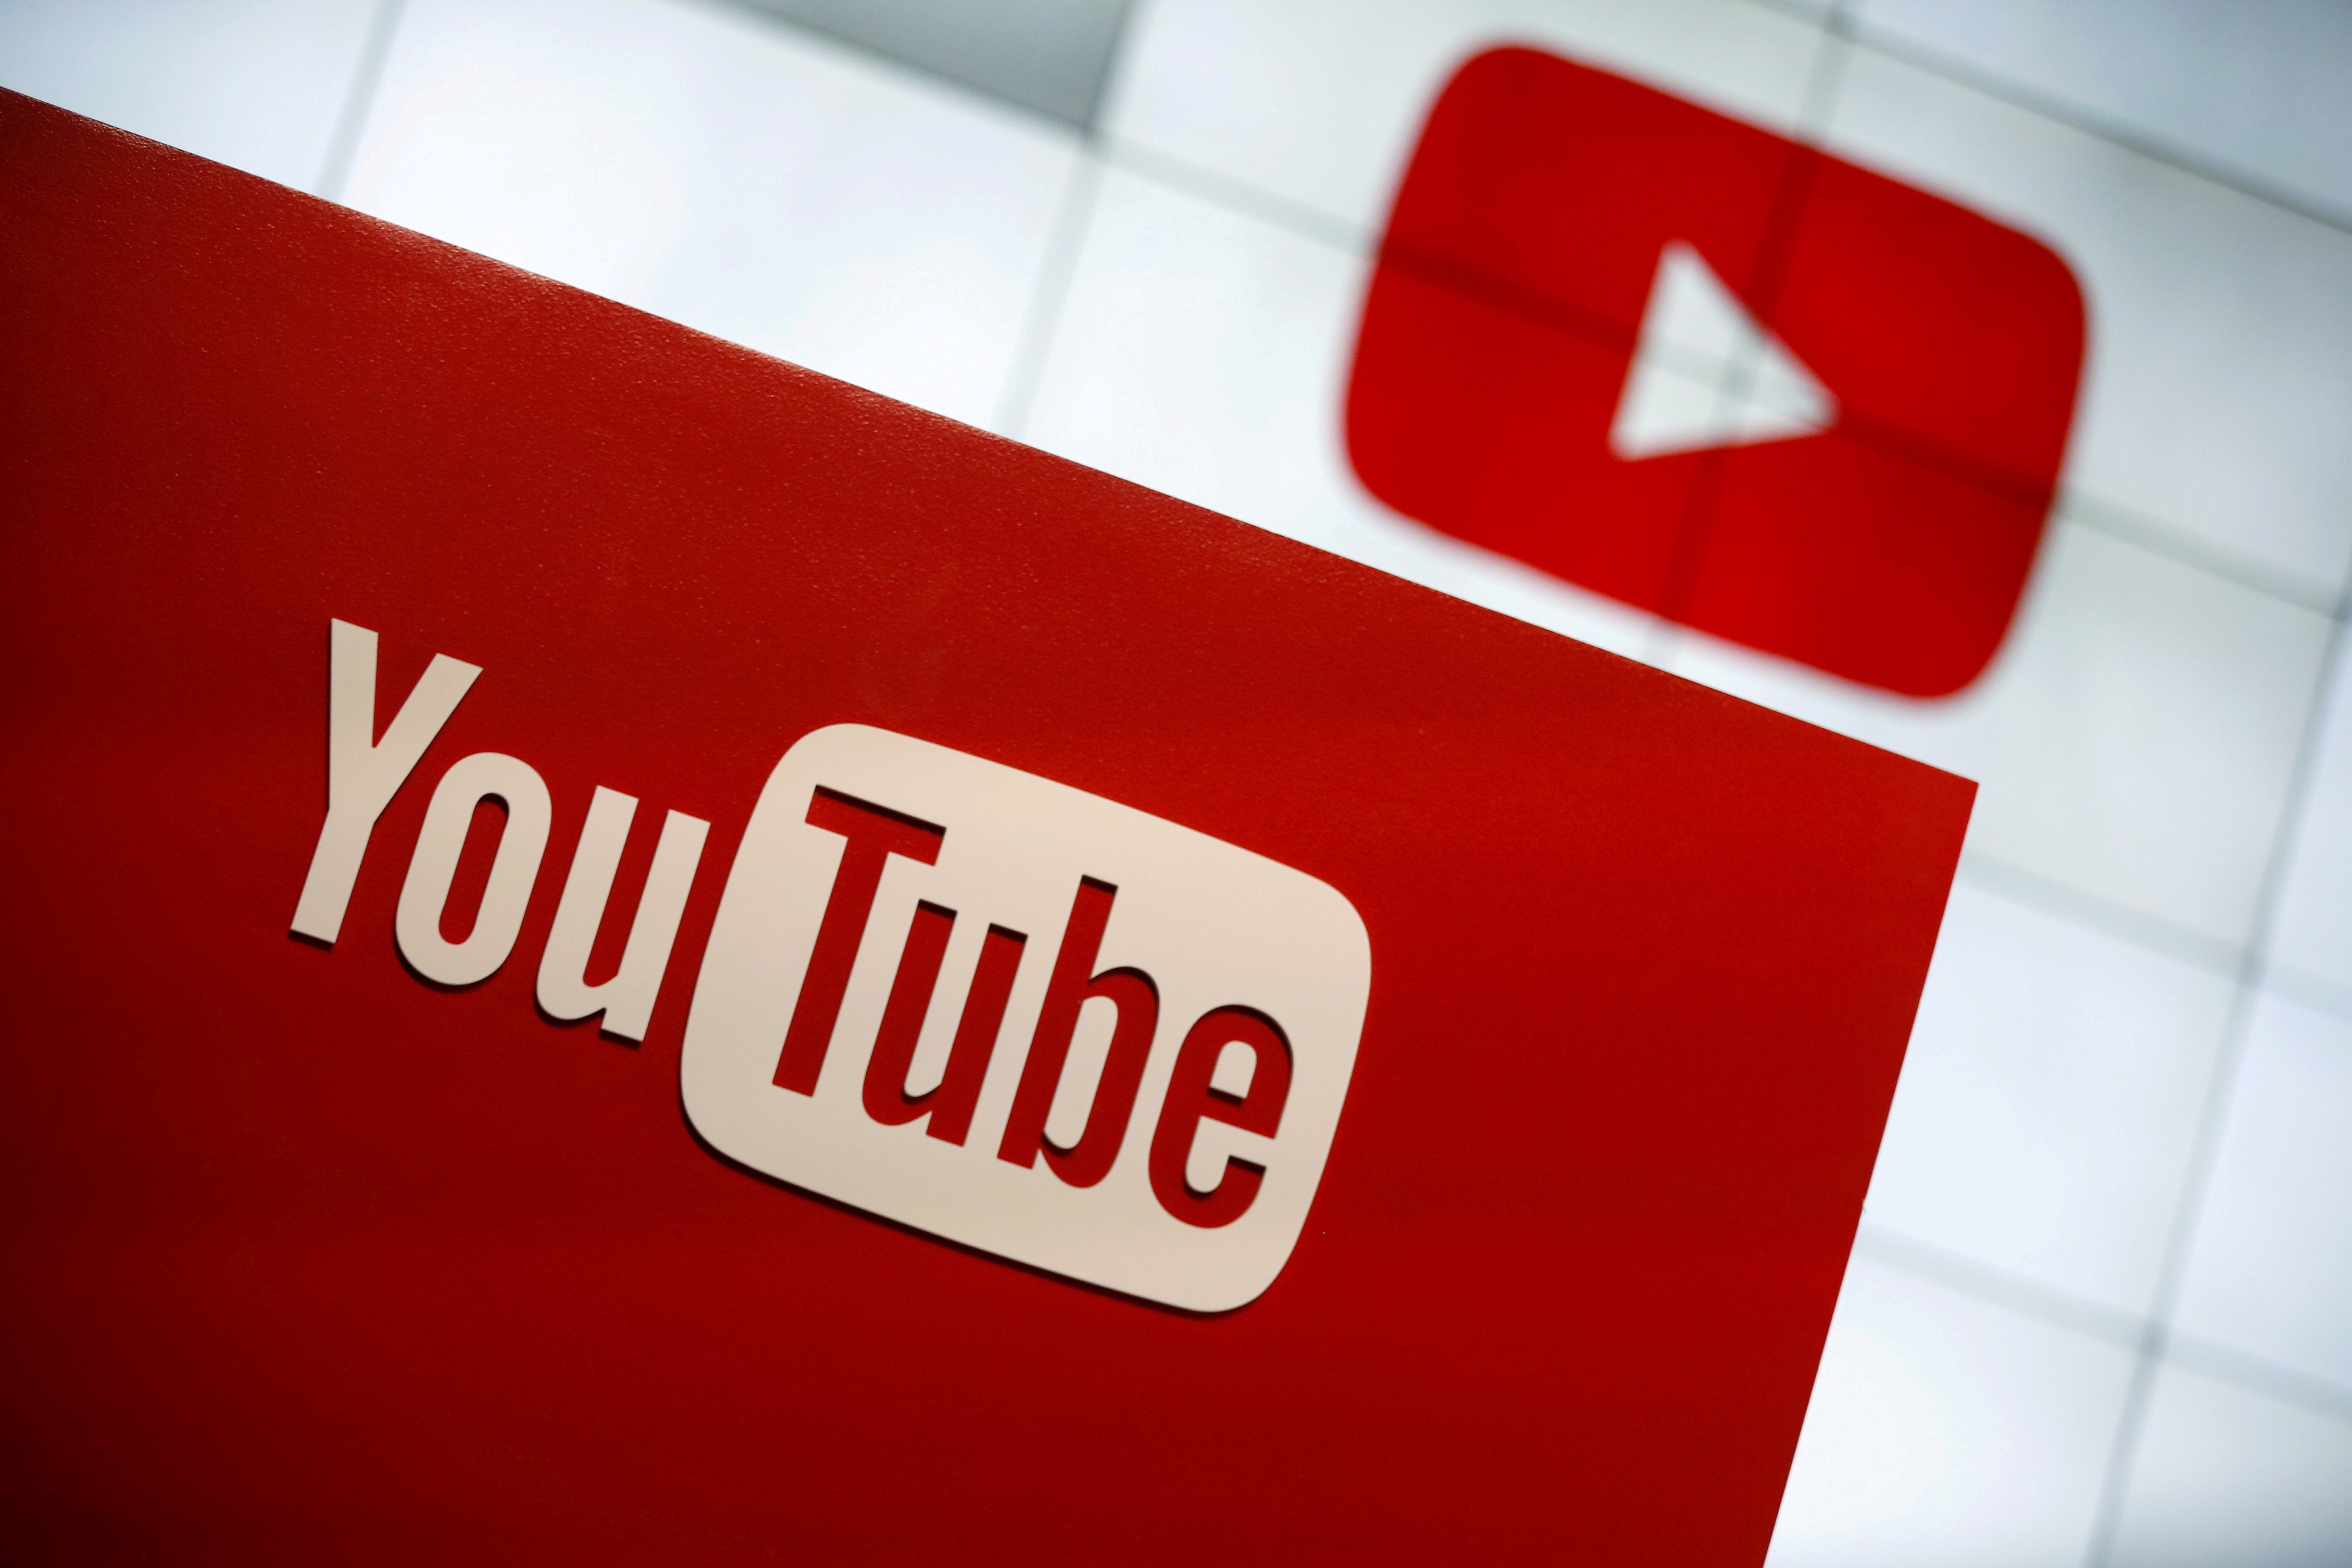 YouTube’s Covid-19 policy bans content that poses a serious risk of egregious harm or which spreads medical misinformation